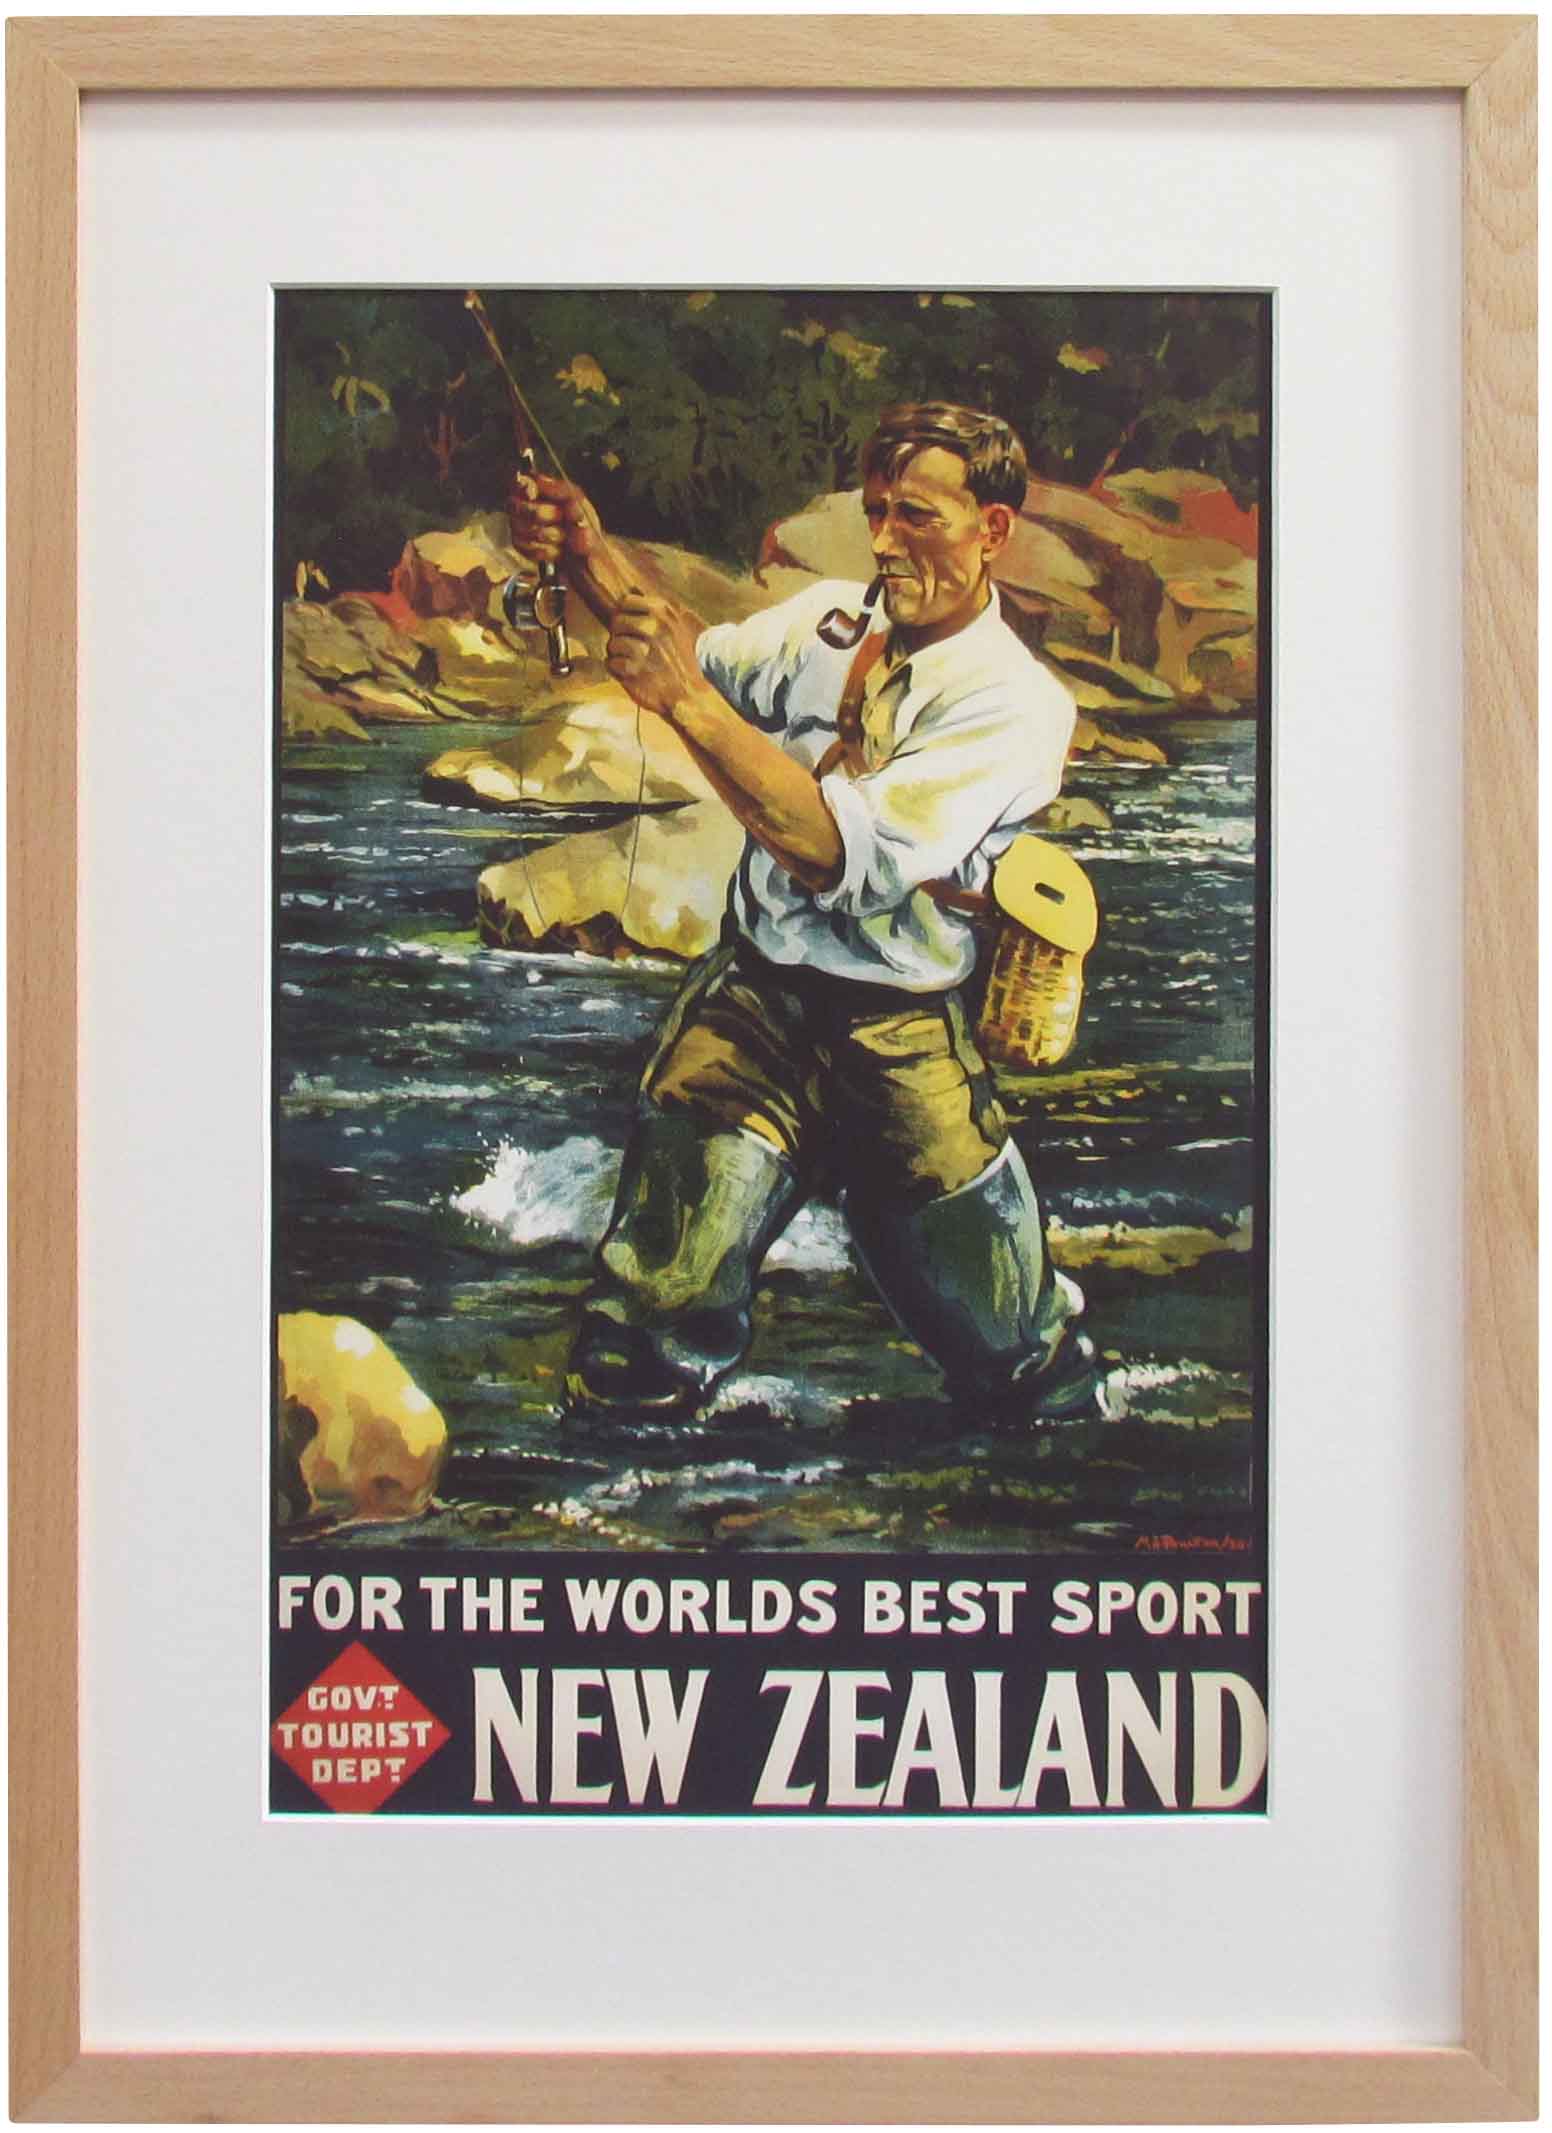  New Zealand Fly Fishing 1930s Vintage Style Travel